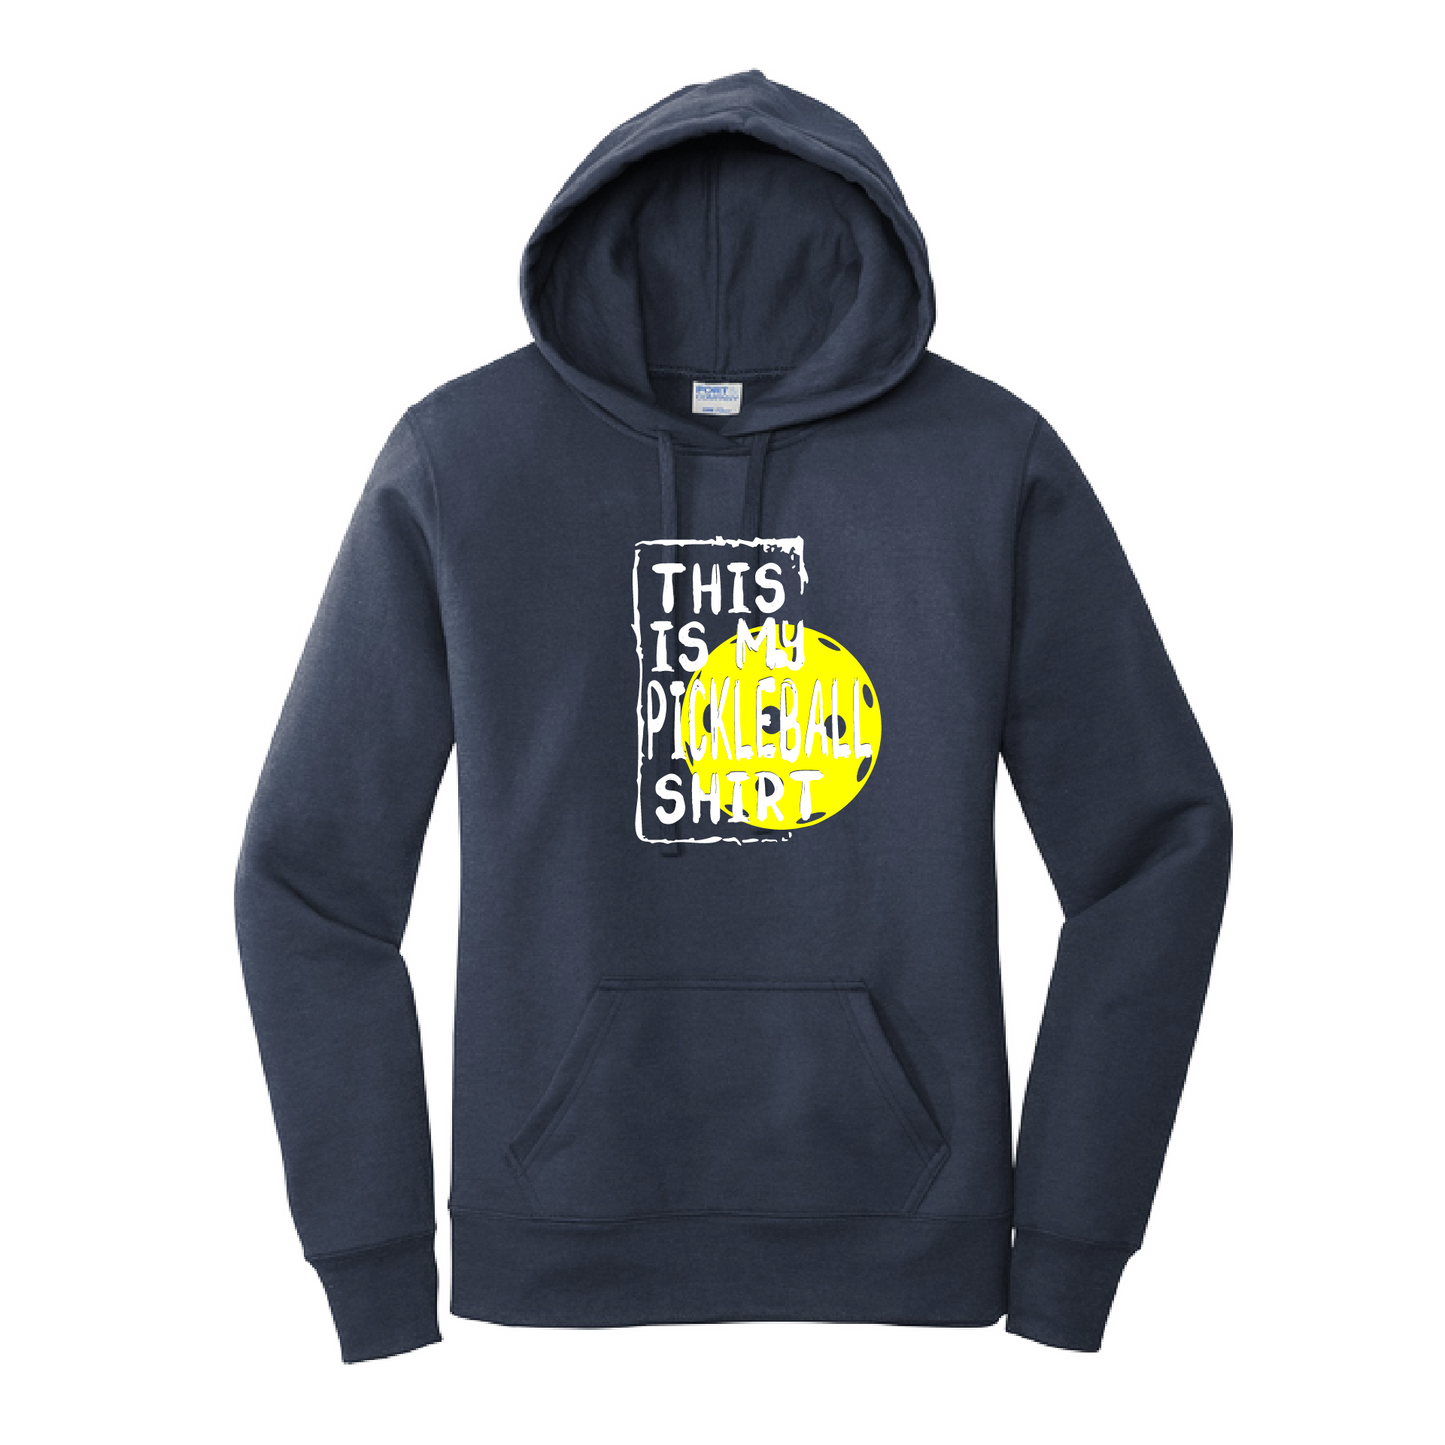 Pickleball Design: This is my Pickleball shirt  Women's Hooded pullover Sweatshirt  Turn up the volume in this Women's Sweatshirts with its perfect mix of softness and attitude. Ultra soft lined inside with a lined hood also. This is fitted nicely for a women's figure. Front pouch pocket.